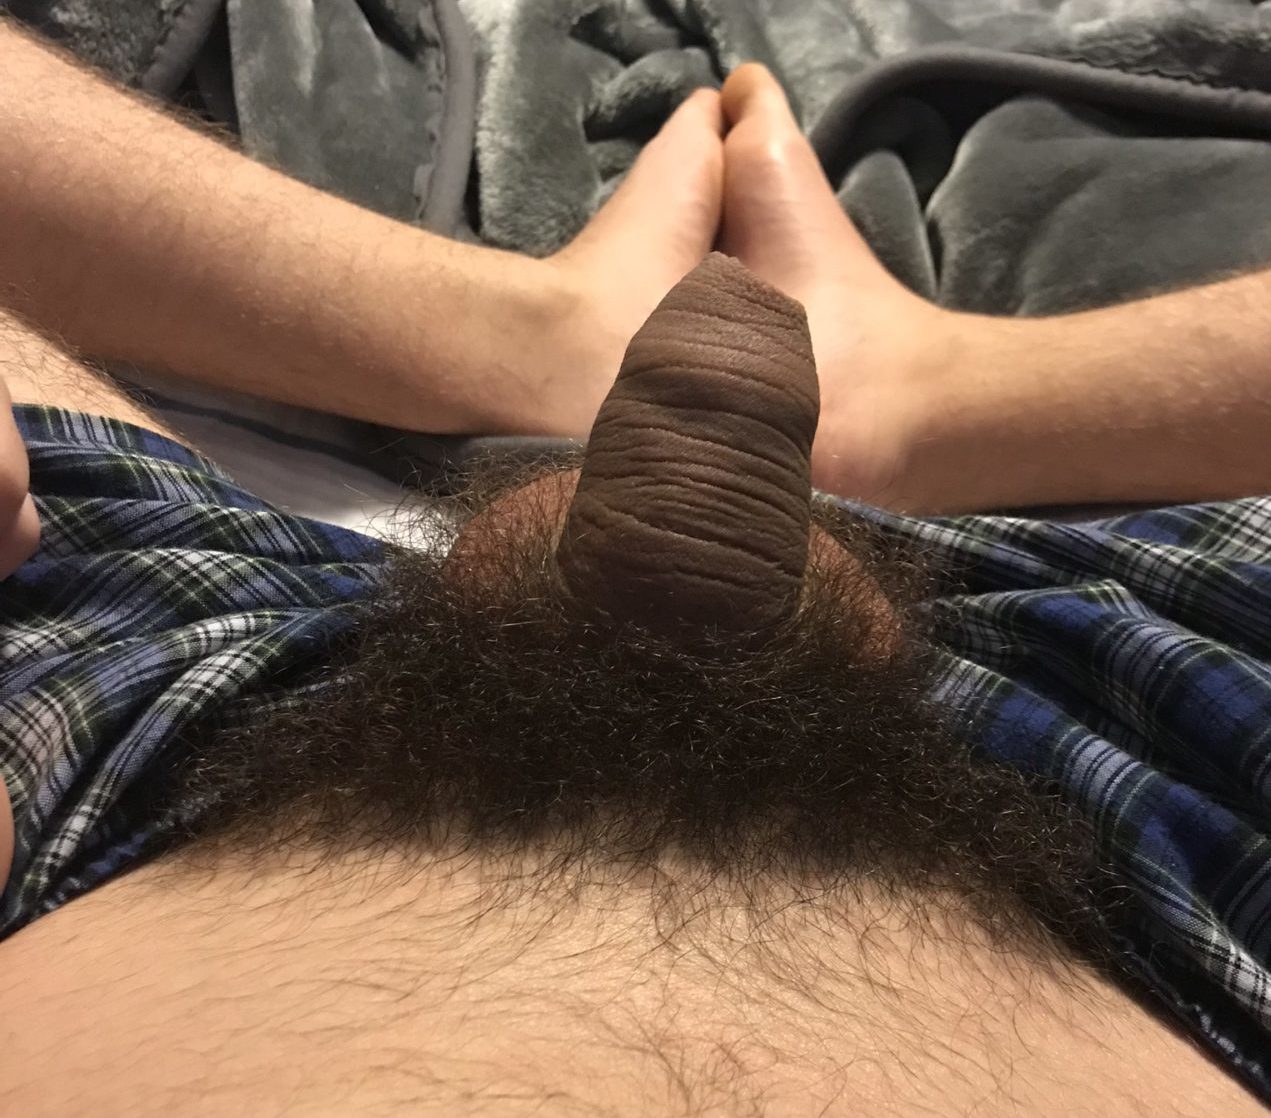 Tall guy with a small penis